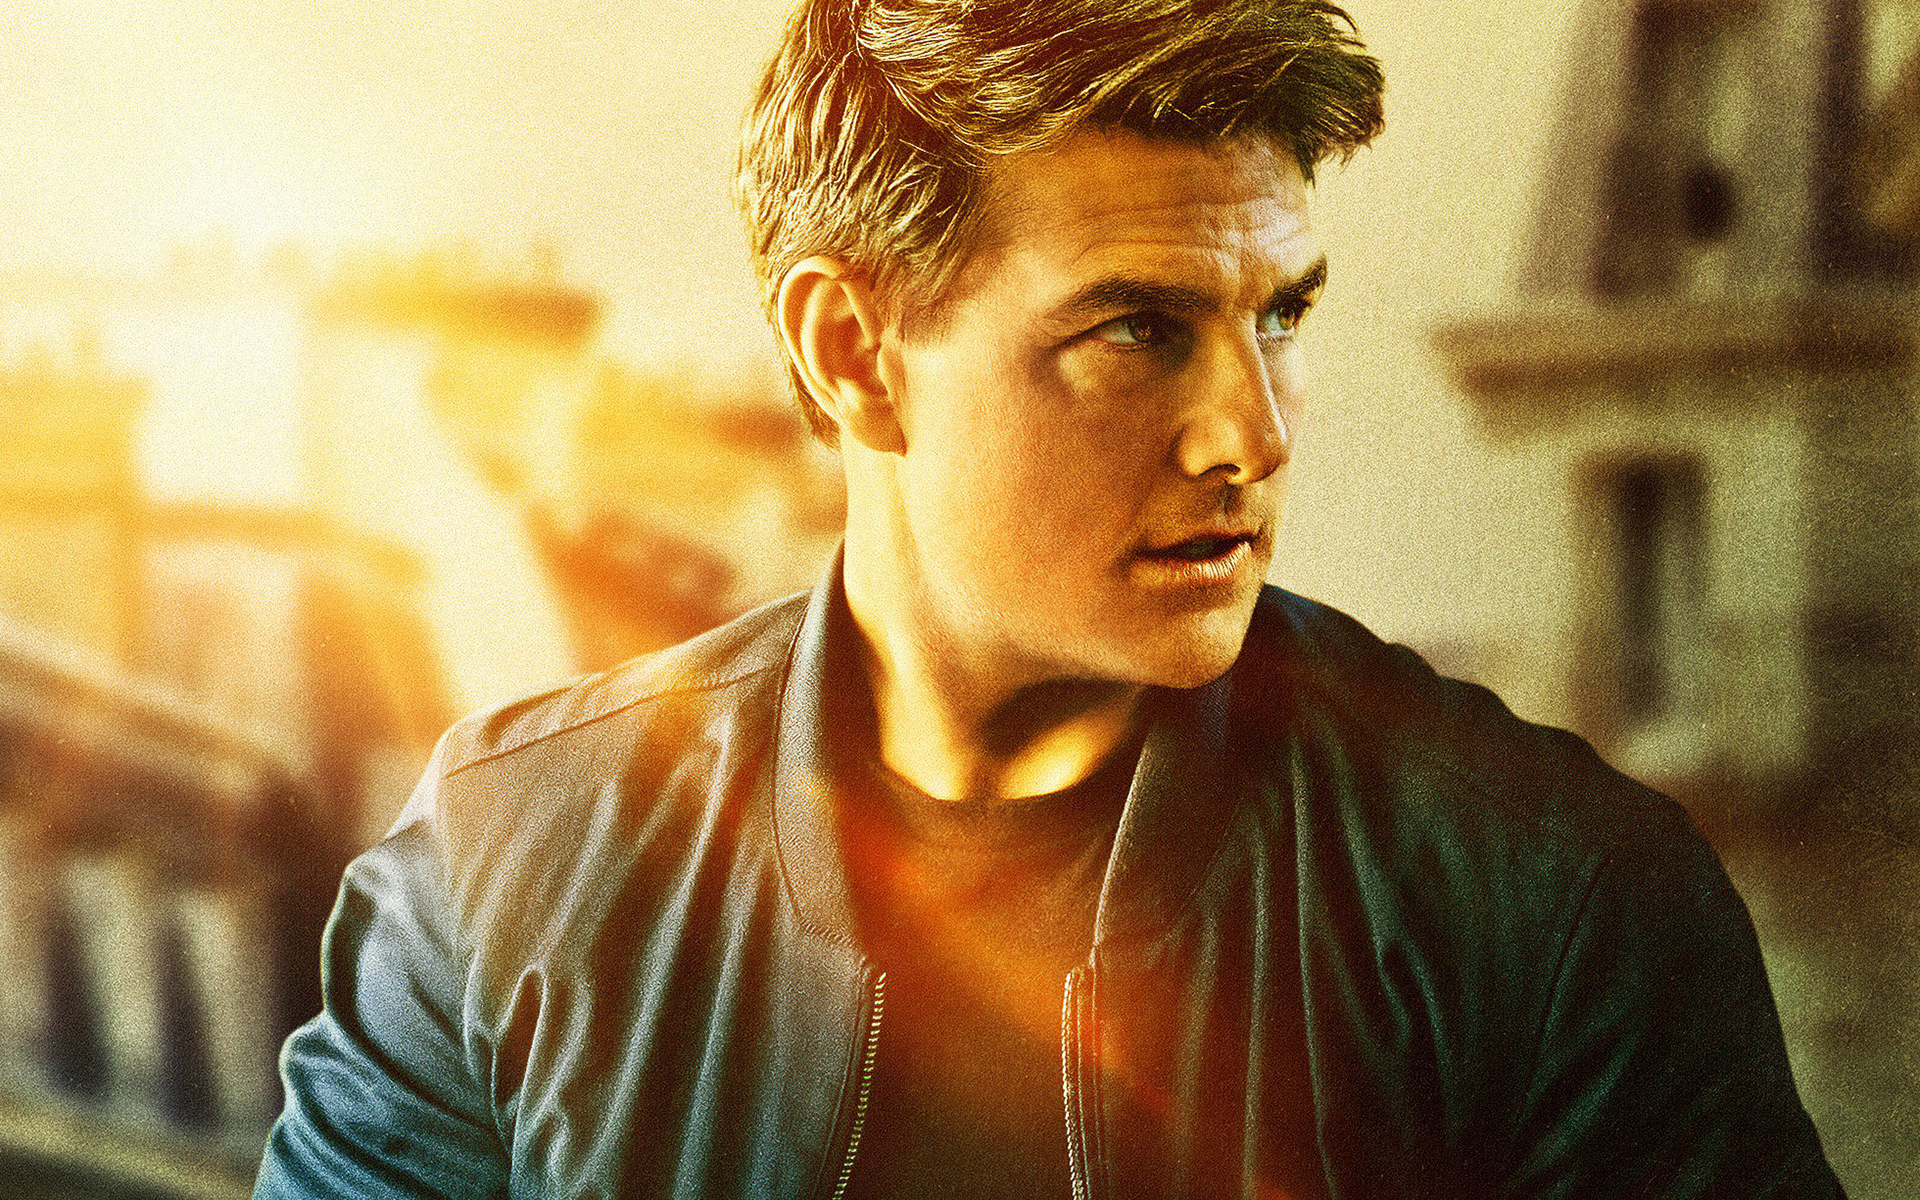 Mission Impossible Fallout Tom Cruise Wallpapers HD Wallpapers